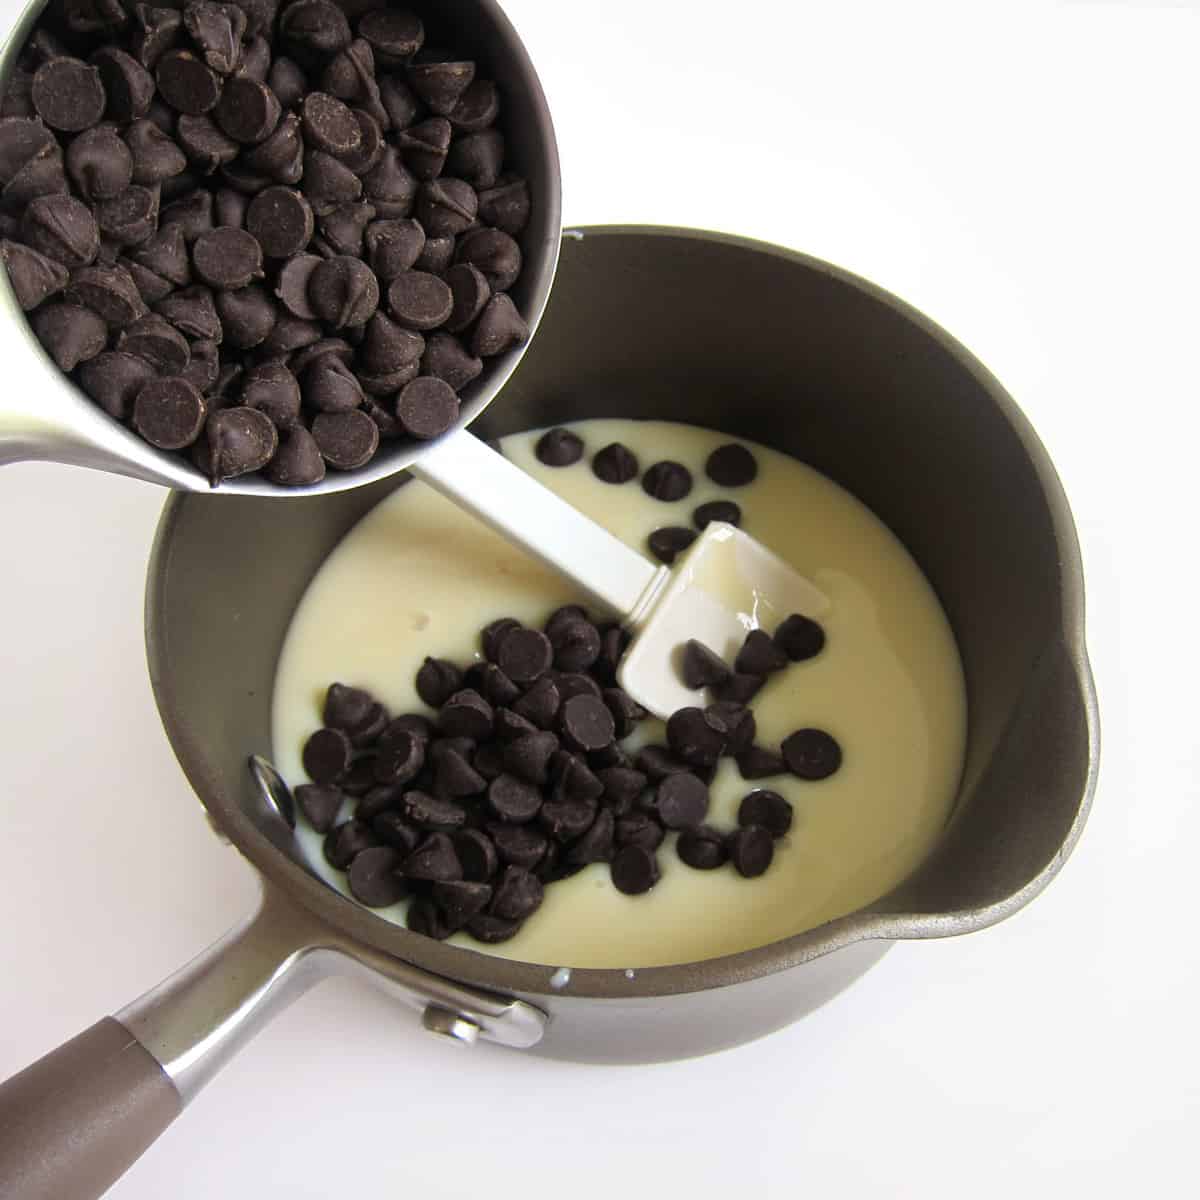 Pouring chocolate chips into a saucepan filled with sweetened condensed milk.